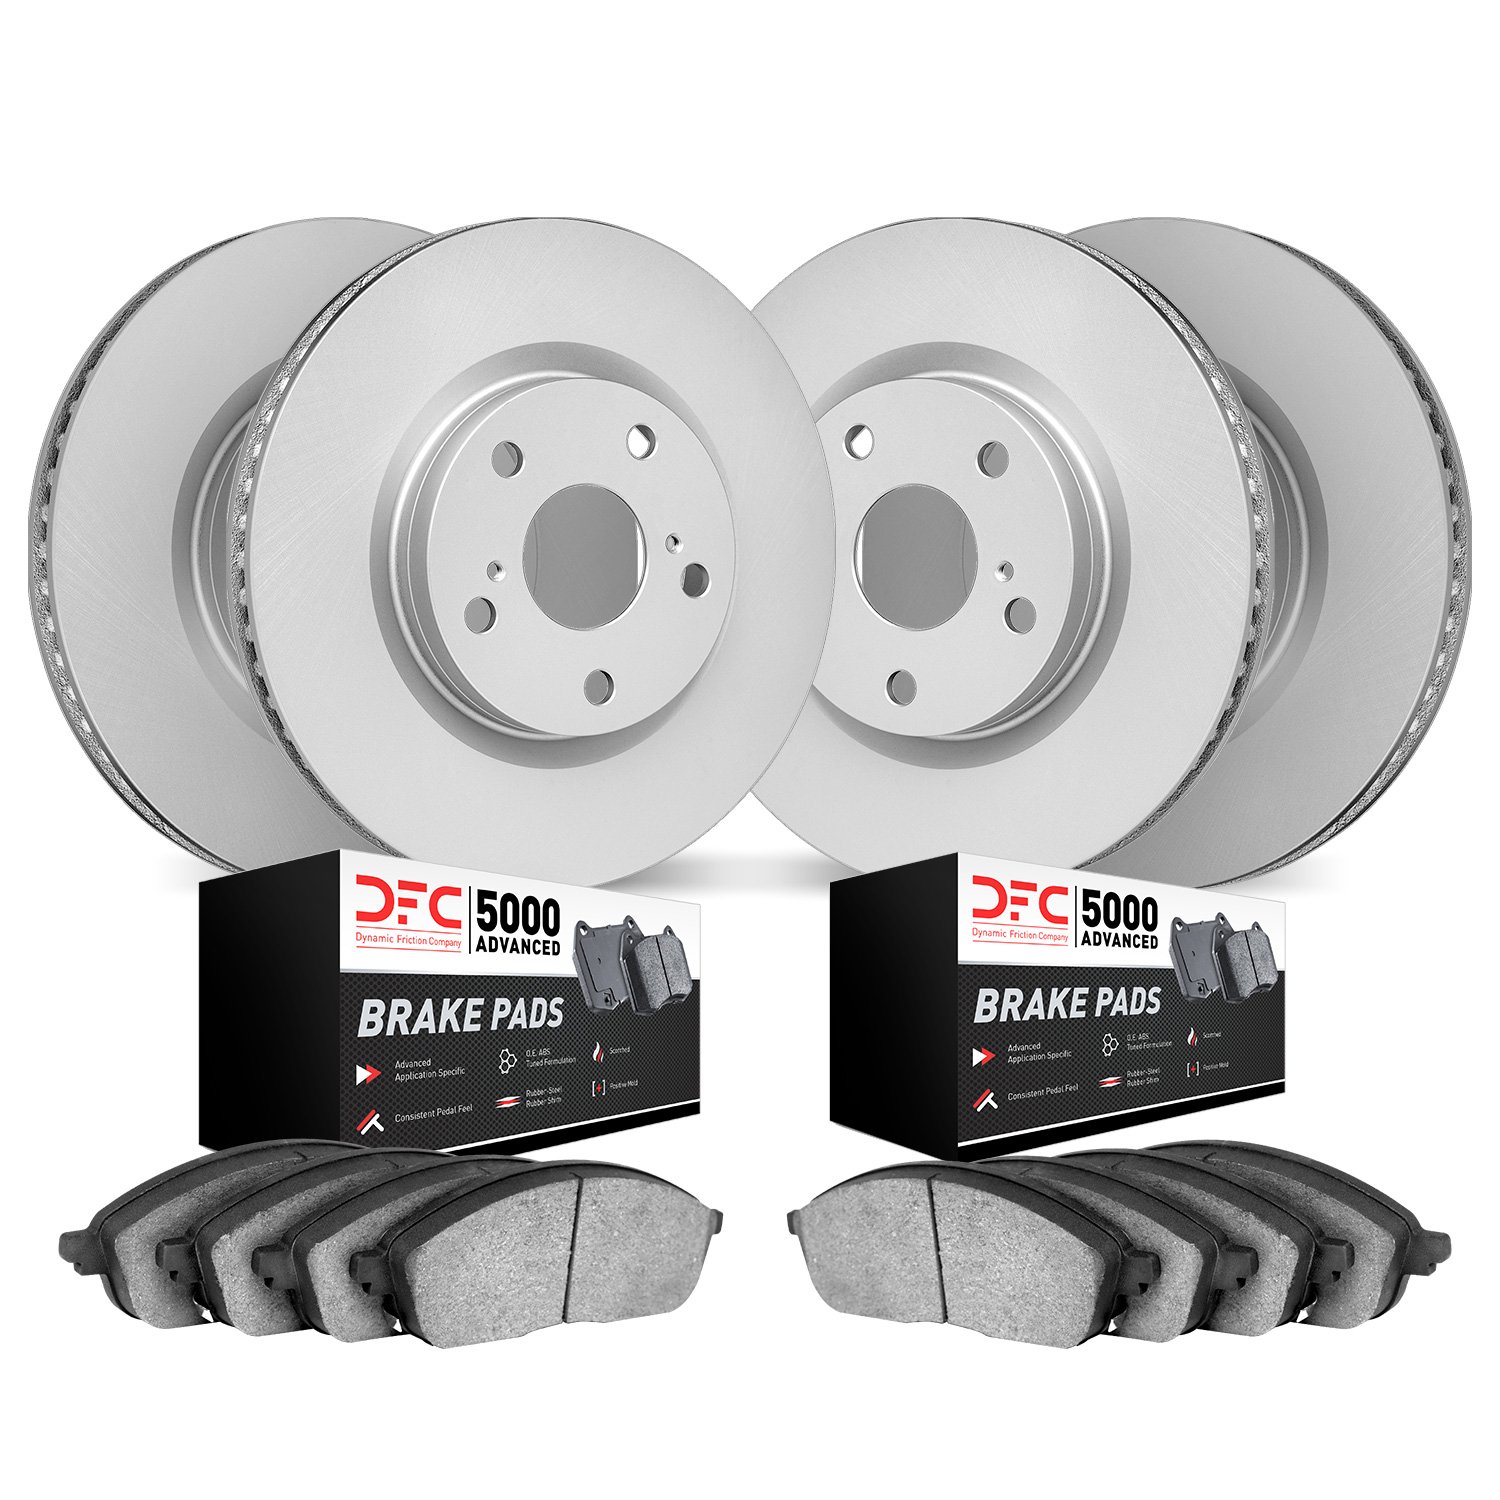 4504-63093 Geospec Brake Rotors w/5000 Advanced Brake Pads Kit, 2019-2019 Mercedes-Benz, Position: Front and Rear